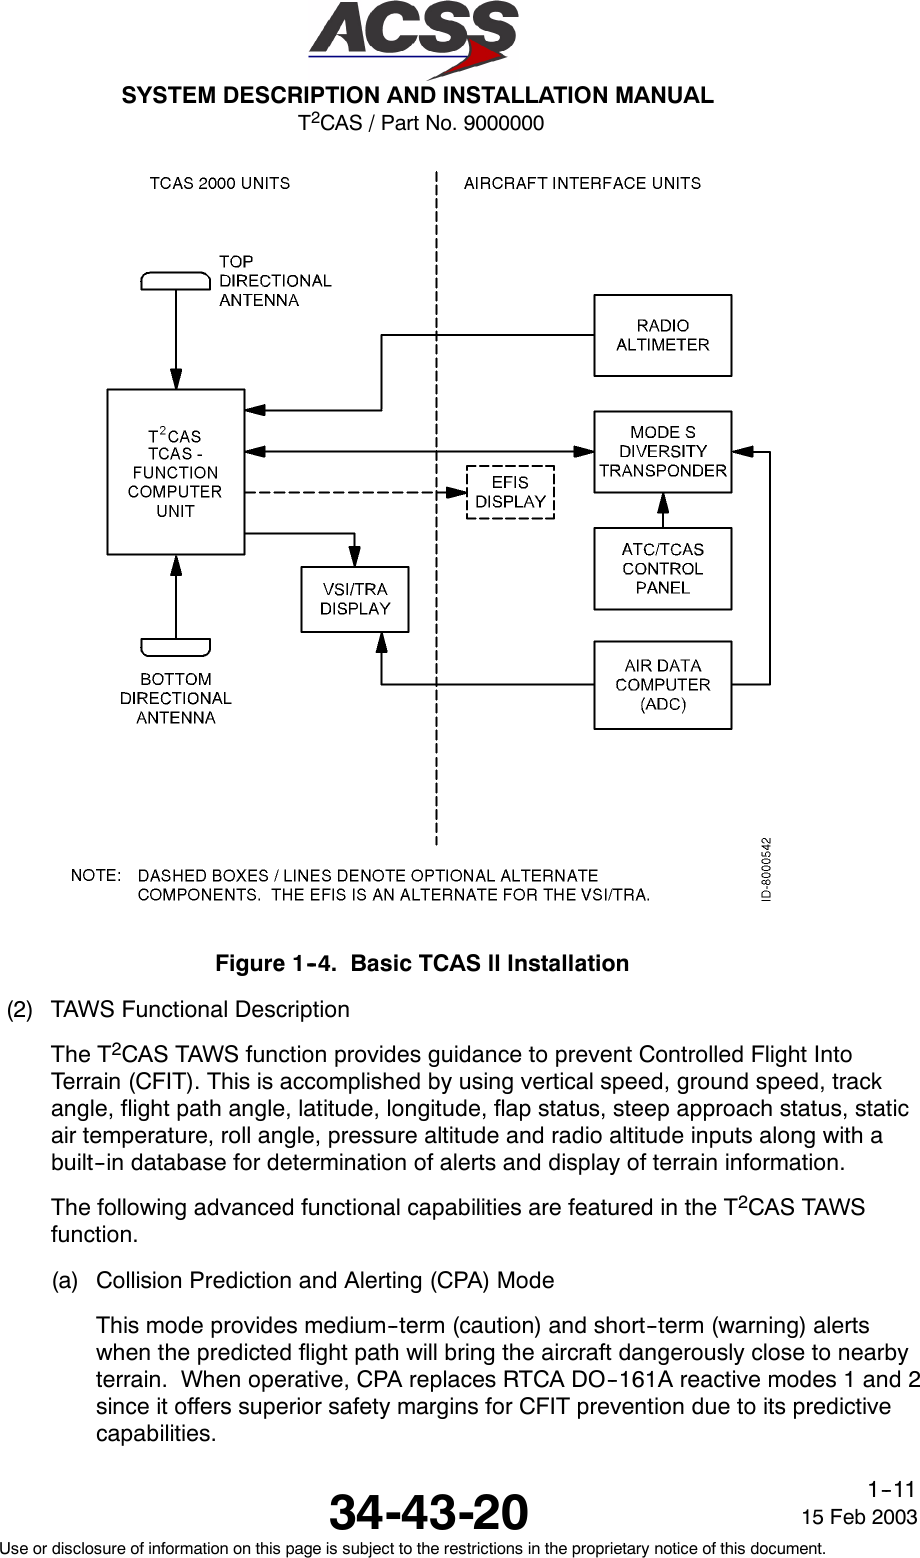 T2CAS / Part No. 9000000SYSTEM DESCRIPTION AND INSTALLATION MANUAL34-43-20 15 Feb 2003Use or disclosure of information on this page is subject to the restrictions in the proprietary notice of this document.1--11Figure 1--4. Basic TCAS ll Installation(2) TAWS Functional DescriptionThe T2CAS TAWS function provides guidance to prevent Controlled Flight IntoTerrain (CFIT). This is accomplished by using vertical speed, ground speed, trackangle, flight path angle, latitude, longitude, flap status, steep approach status, staticair temperature, roll angle, pressure altitude and radio altitude inputs along with abuilt--in database for determination of alerts and display of terrain information.The following advanced functional capabilities are featured in the T2CAS TAWSfunction.(a) Collision Prediction and Alerting (CPA) ModeThis mode provides medium--term (caution) and short--term (warning) alertswhen the predicted flight path will bring the aircraft dangerously close to nearbyterrain. When operative, CPA replaces RTCA DO--161A reactive modes 1 and 2since it offers superior safety margins for CFIT prevention due to its predictivecapabilities.